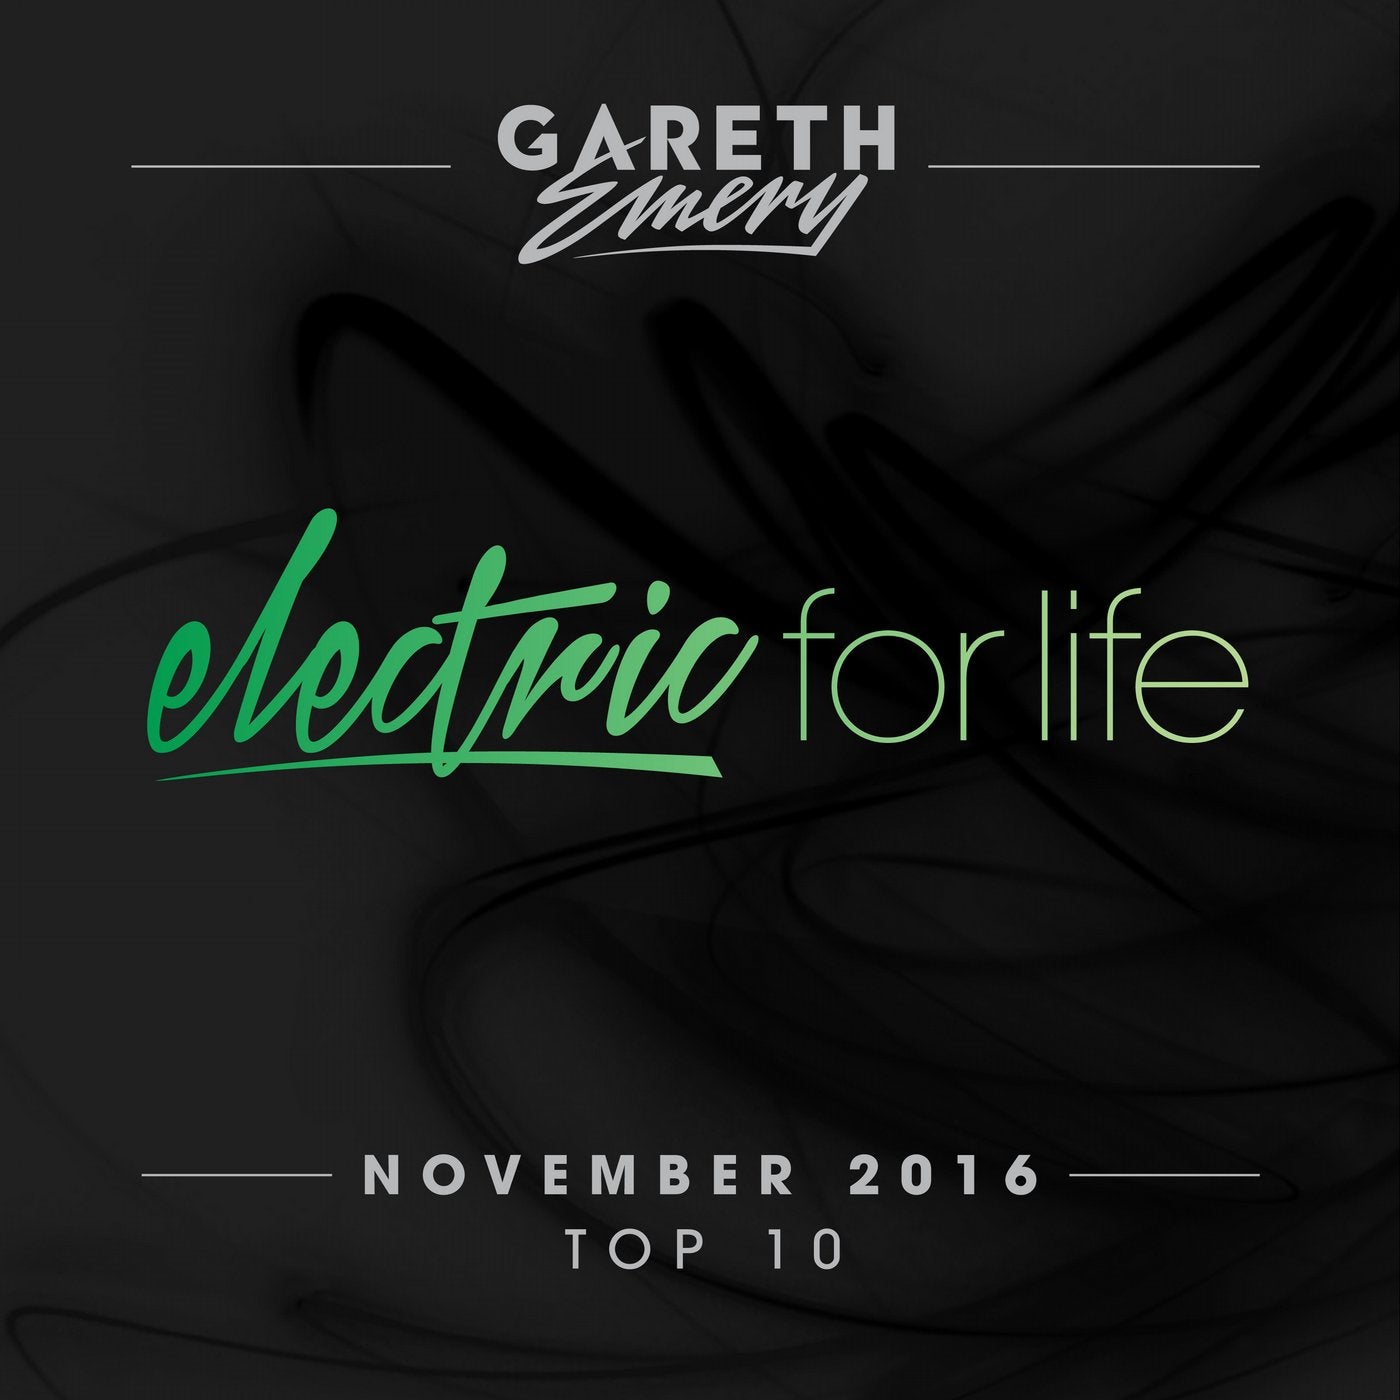 Electric For Life Top 10 - November 2016 (by Gareth Emery) - Extended Versions